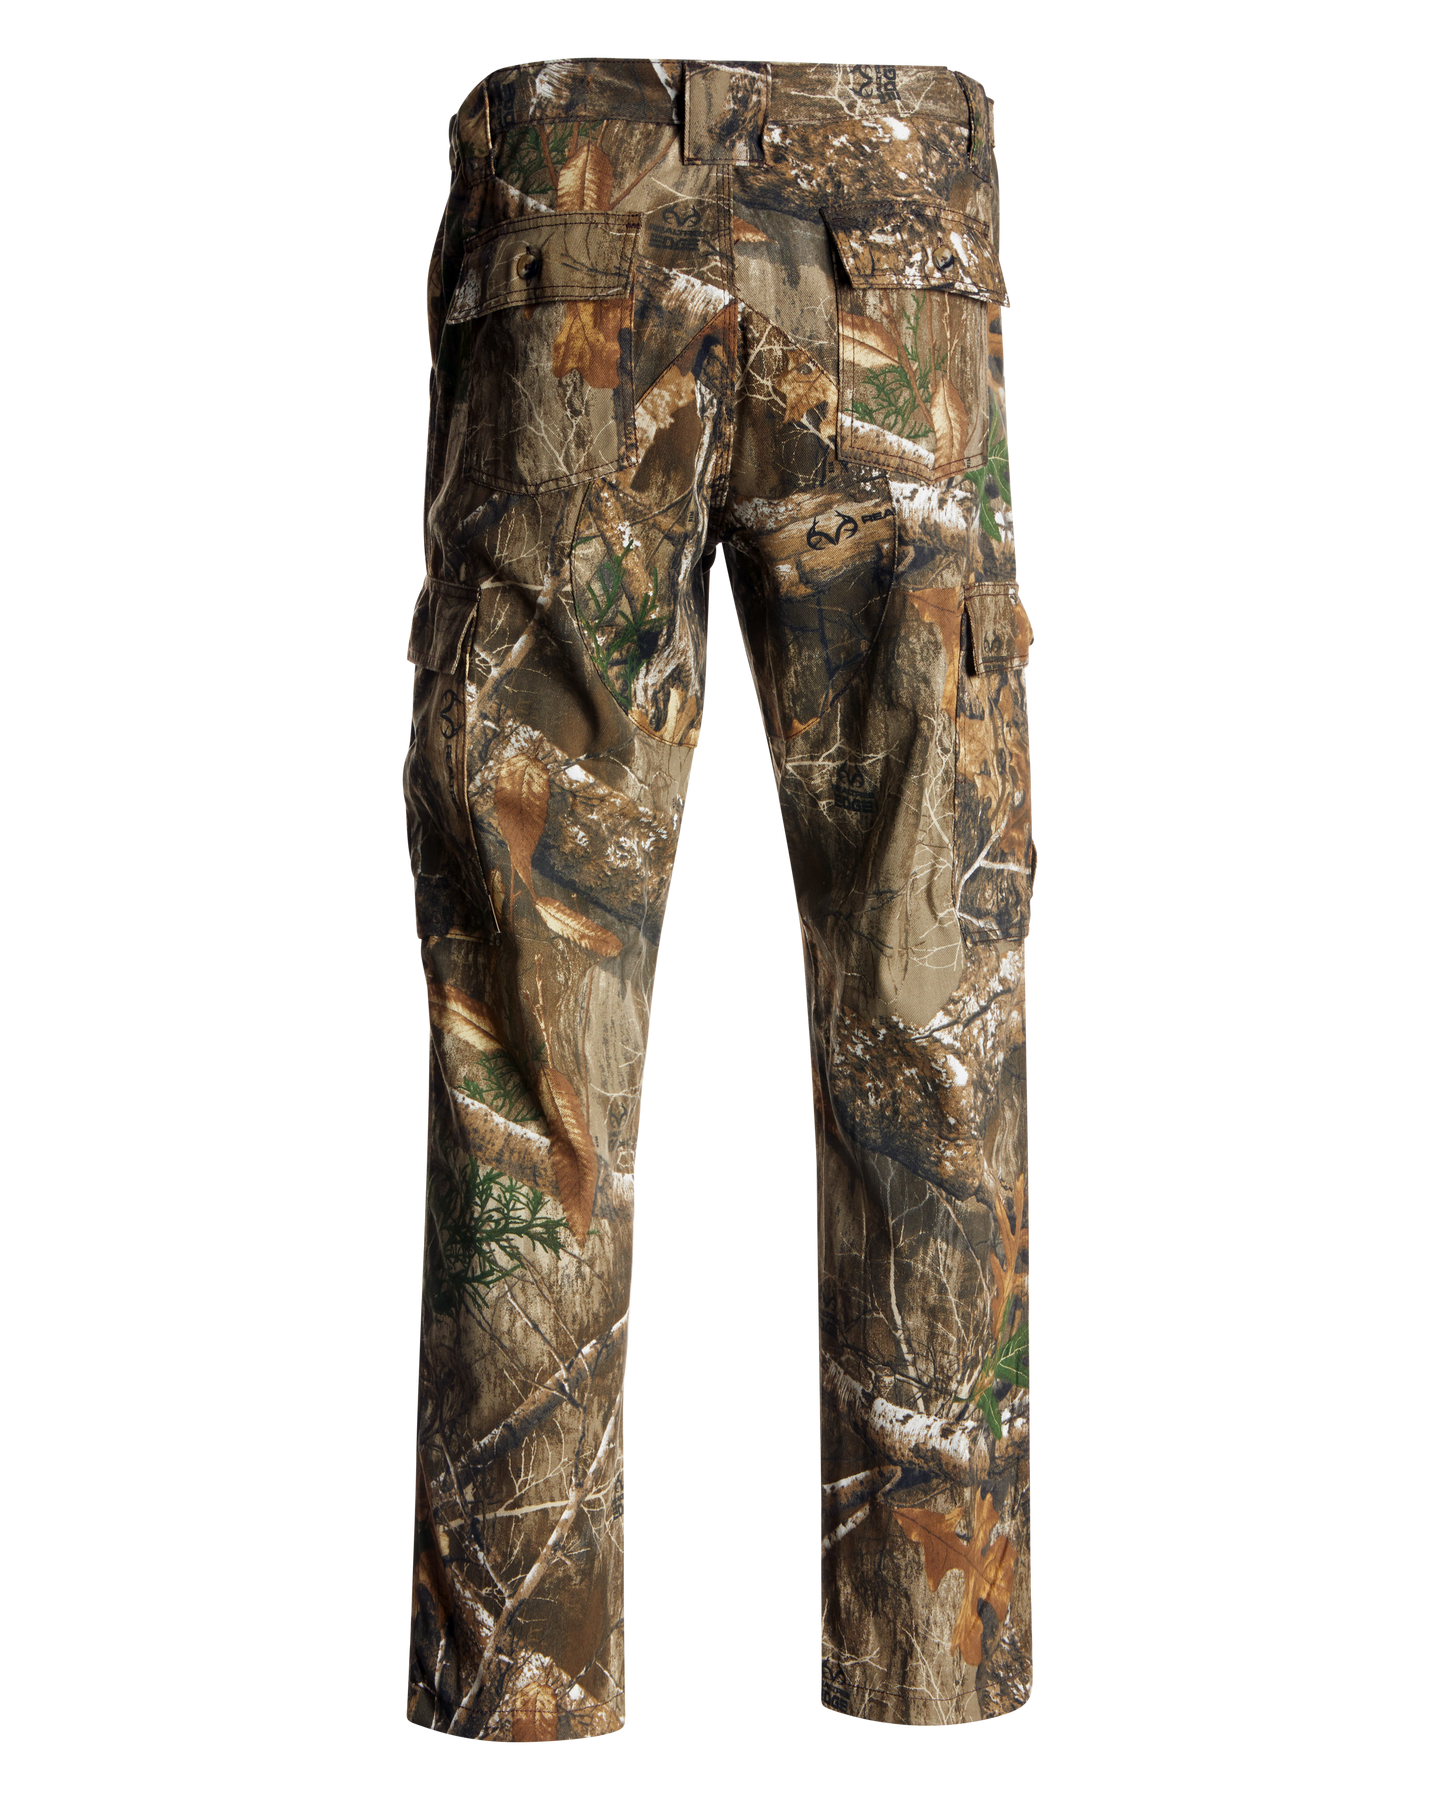 MENS NEW CARGO LONG WALK SHORTS AND PANTS 2-IN-1 CONVERTIBLE CAMO SIZES 30  TO 42